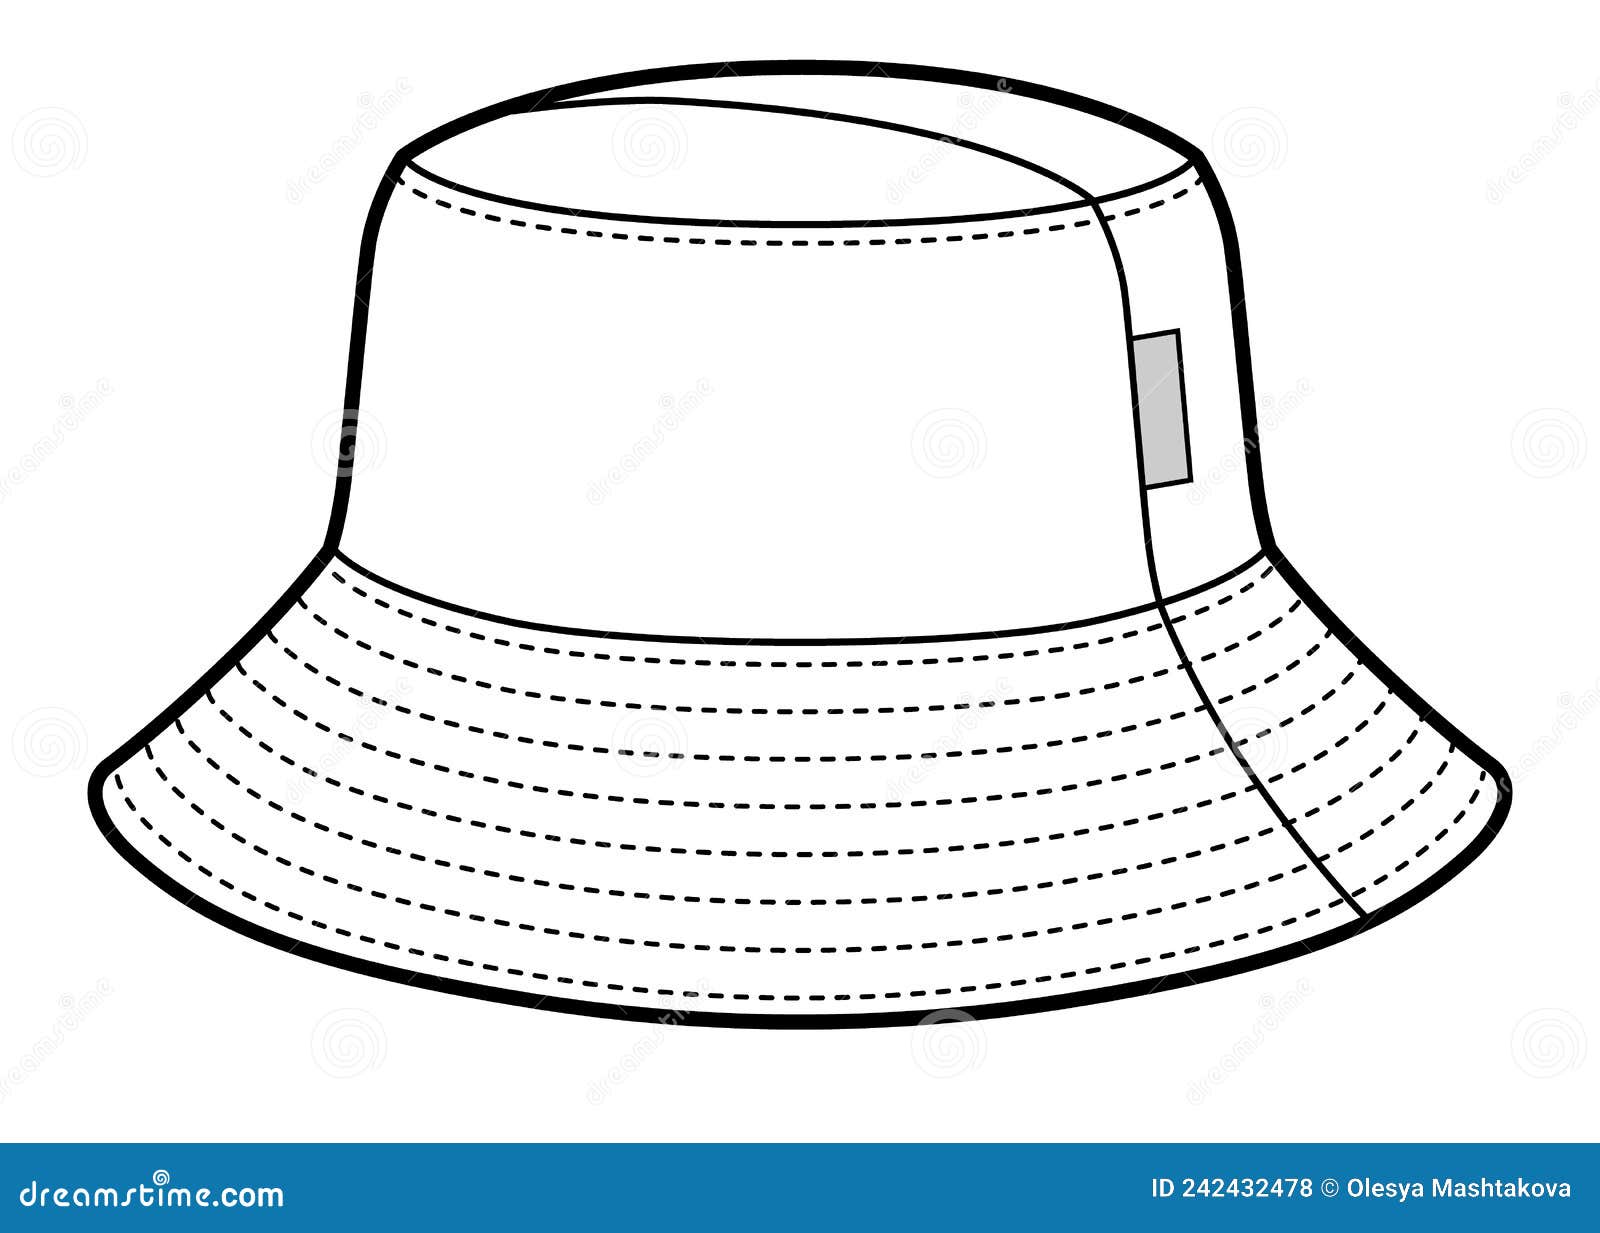 Panama Unisex Outline for Coloring, Bucket Hat Stock Vector ...